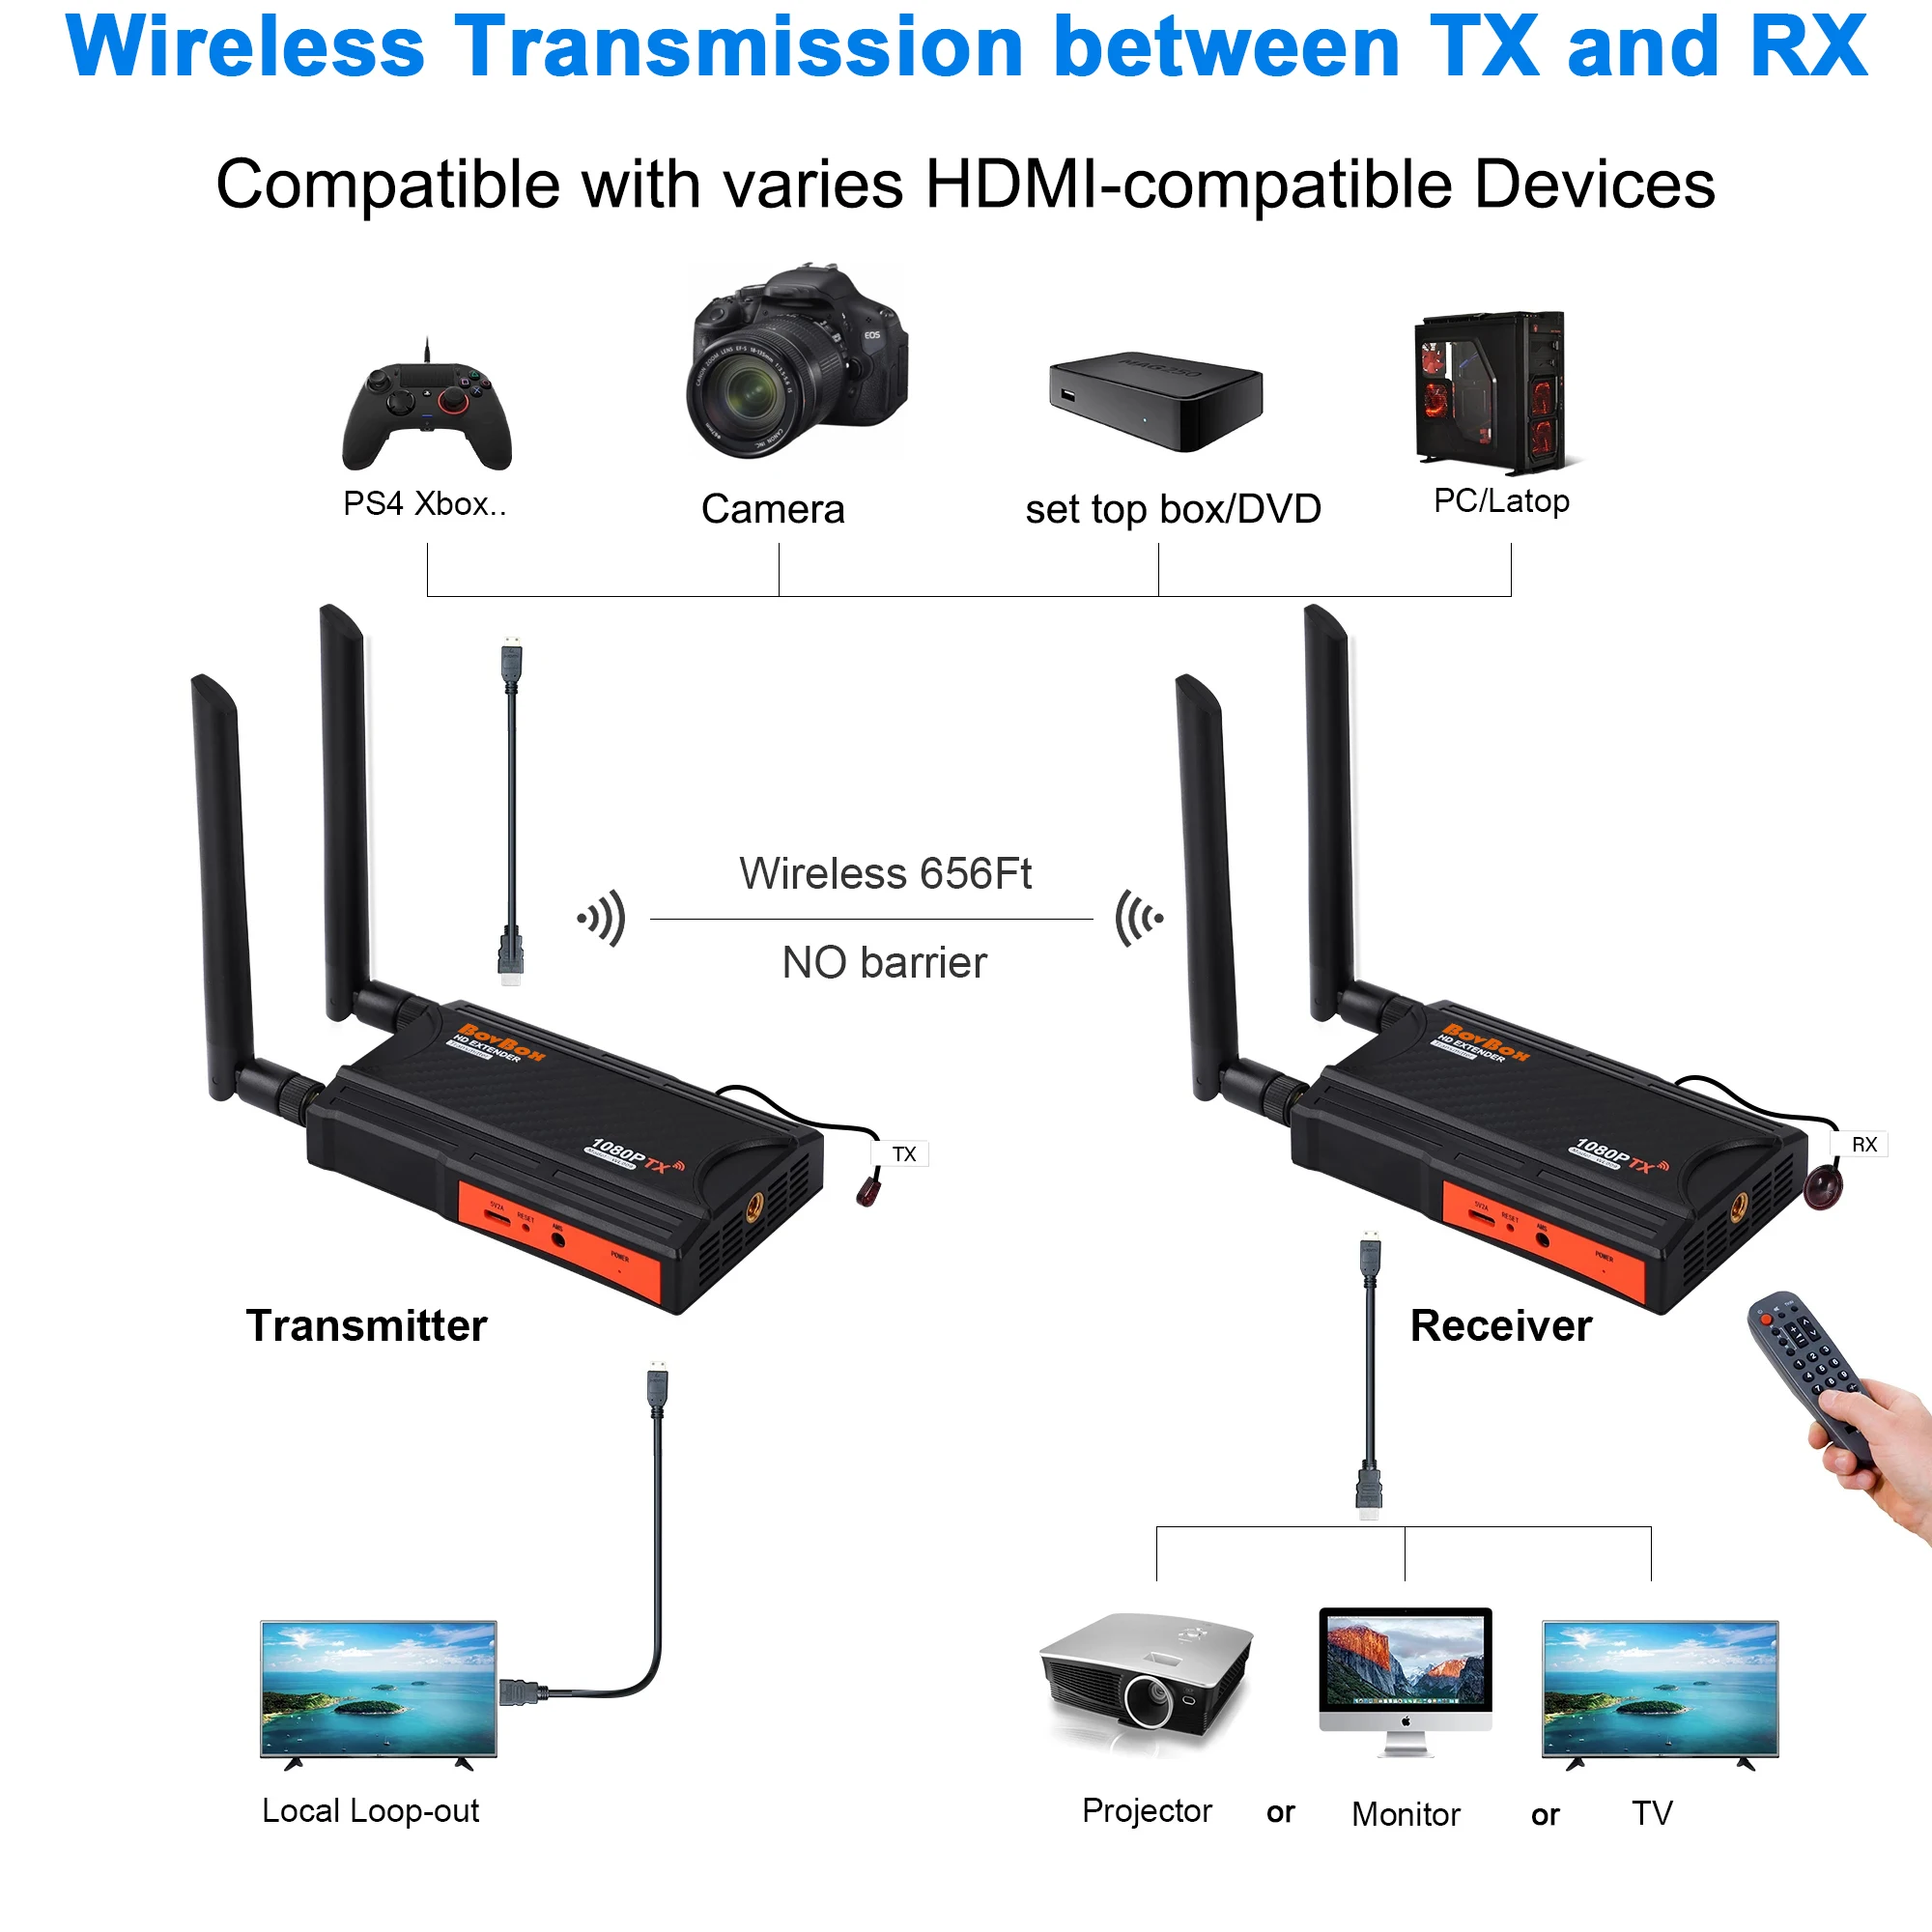 

Wireless 1080P 200M TV Stick Video Transmitter Receiver 5.8Ghz HDMI Extender IR Remote for STB DVD DSLR Camera PC To TV Monitor